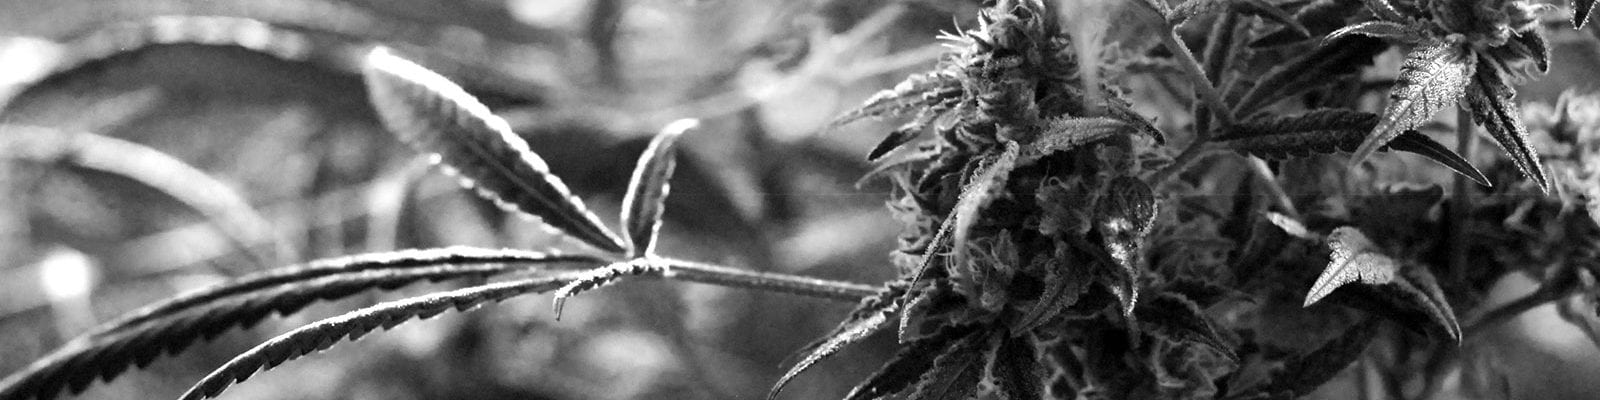 Black and white photograph of a cannabis nug and a long-armed leaf protruding away from it.